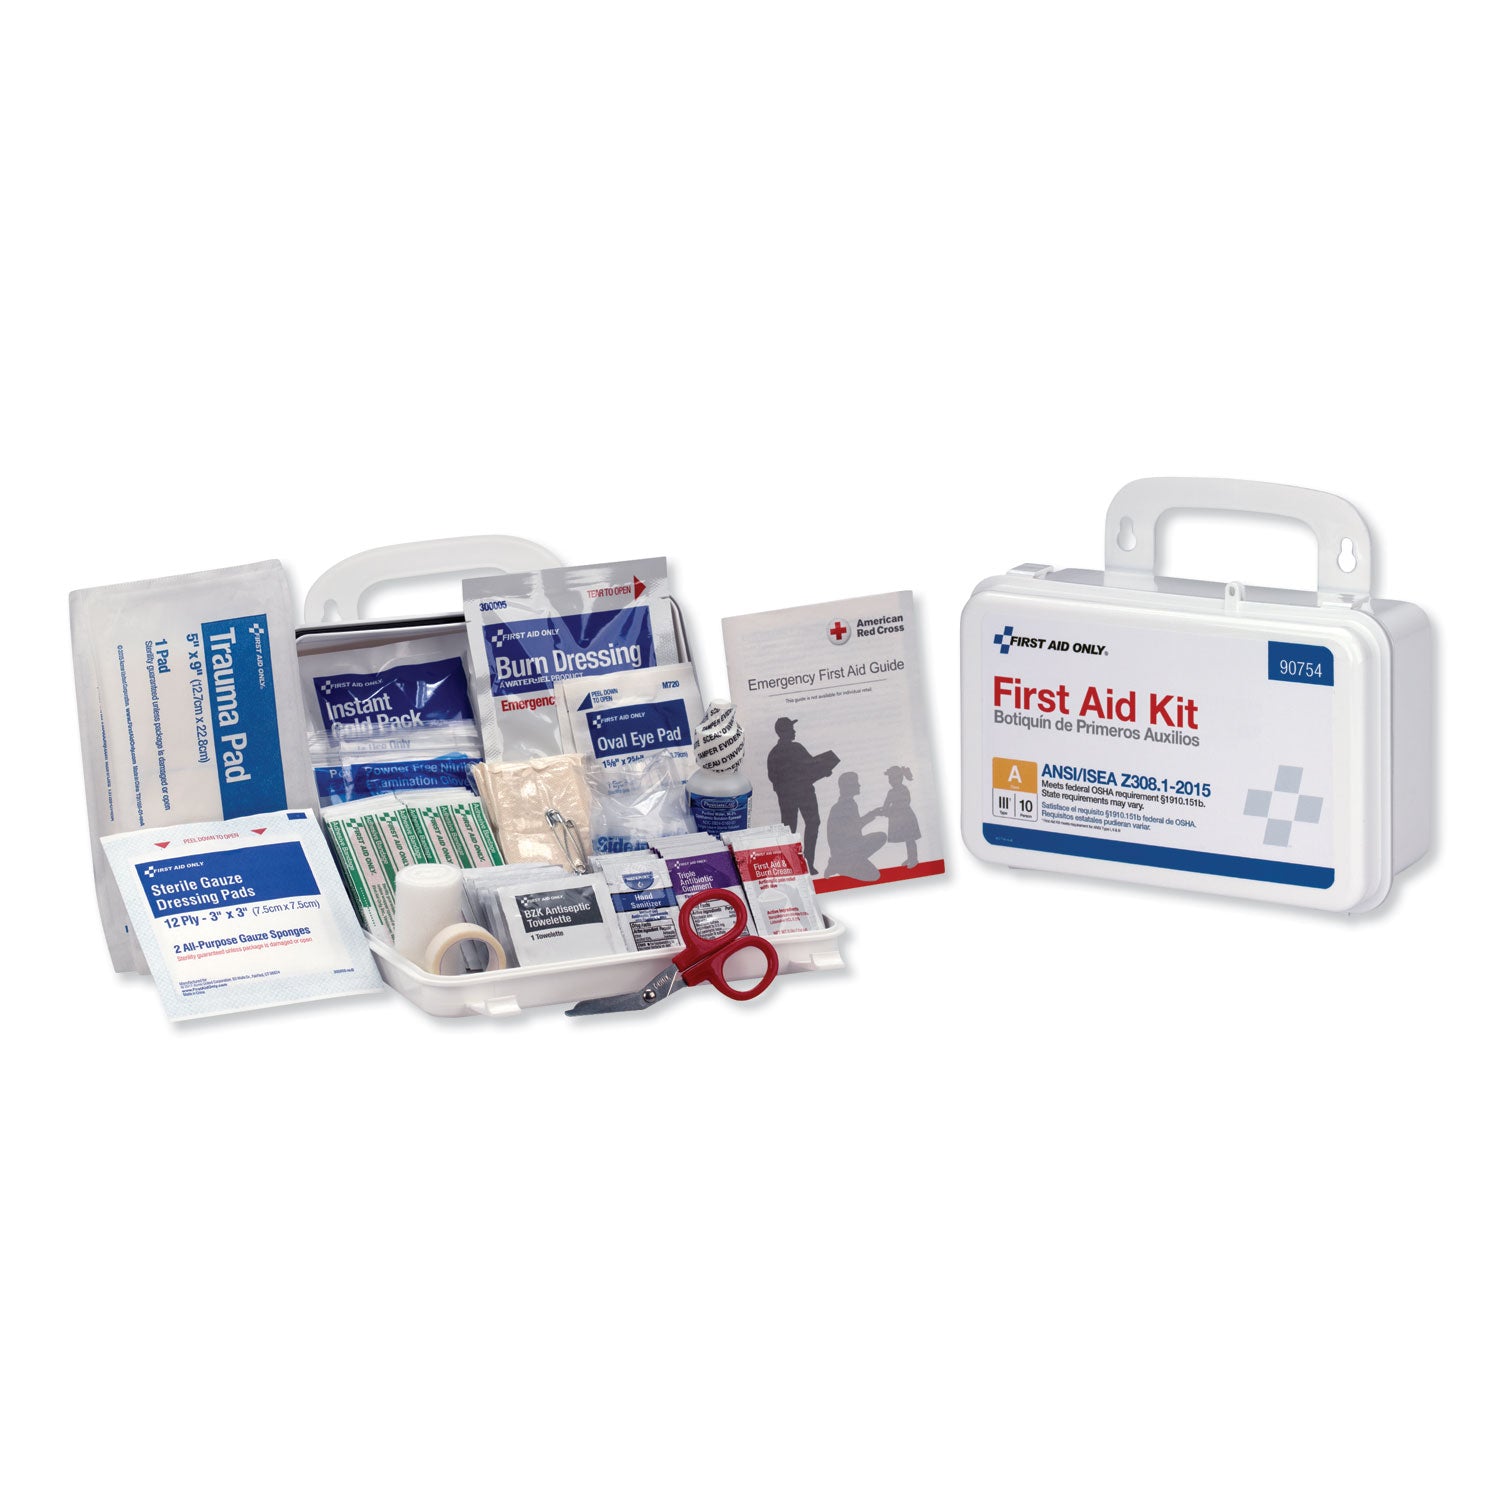 ansi-class-a-10-person-first-aid-kit-71-pieces-plastic-case_fao90754 - 1